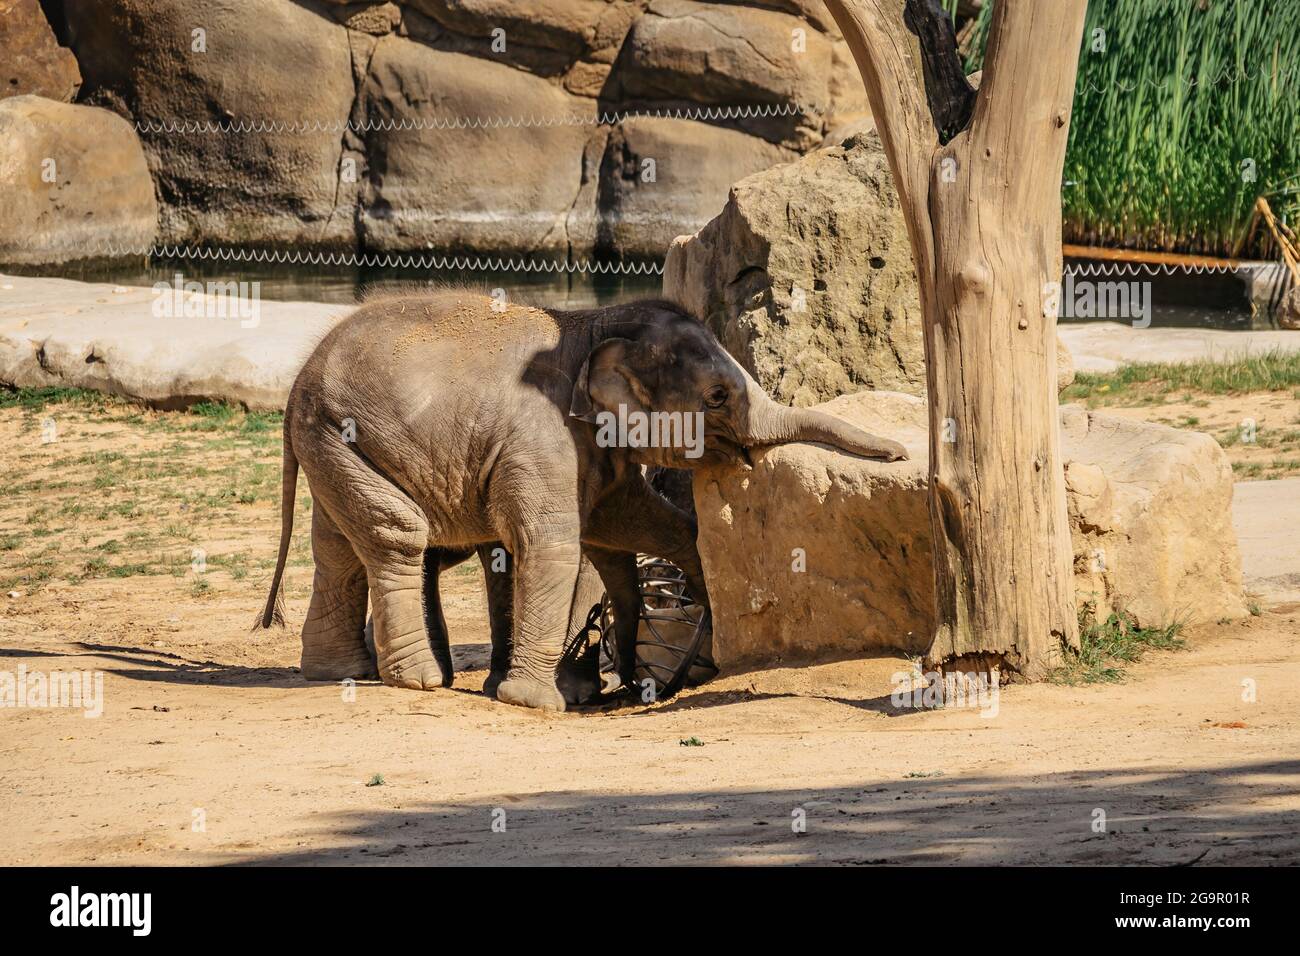 Cute adorable baby elephant having fun in   with  long trunk,tusks,large ear flaps, massive legs Stock Photo - Alamy